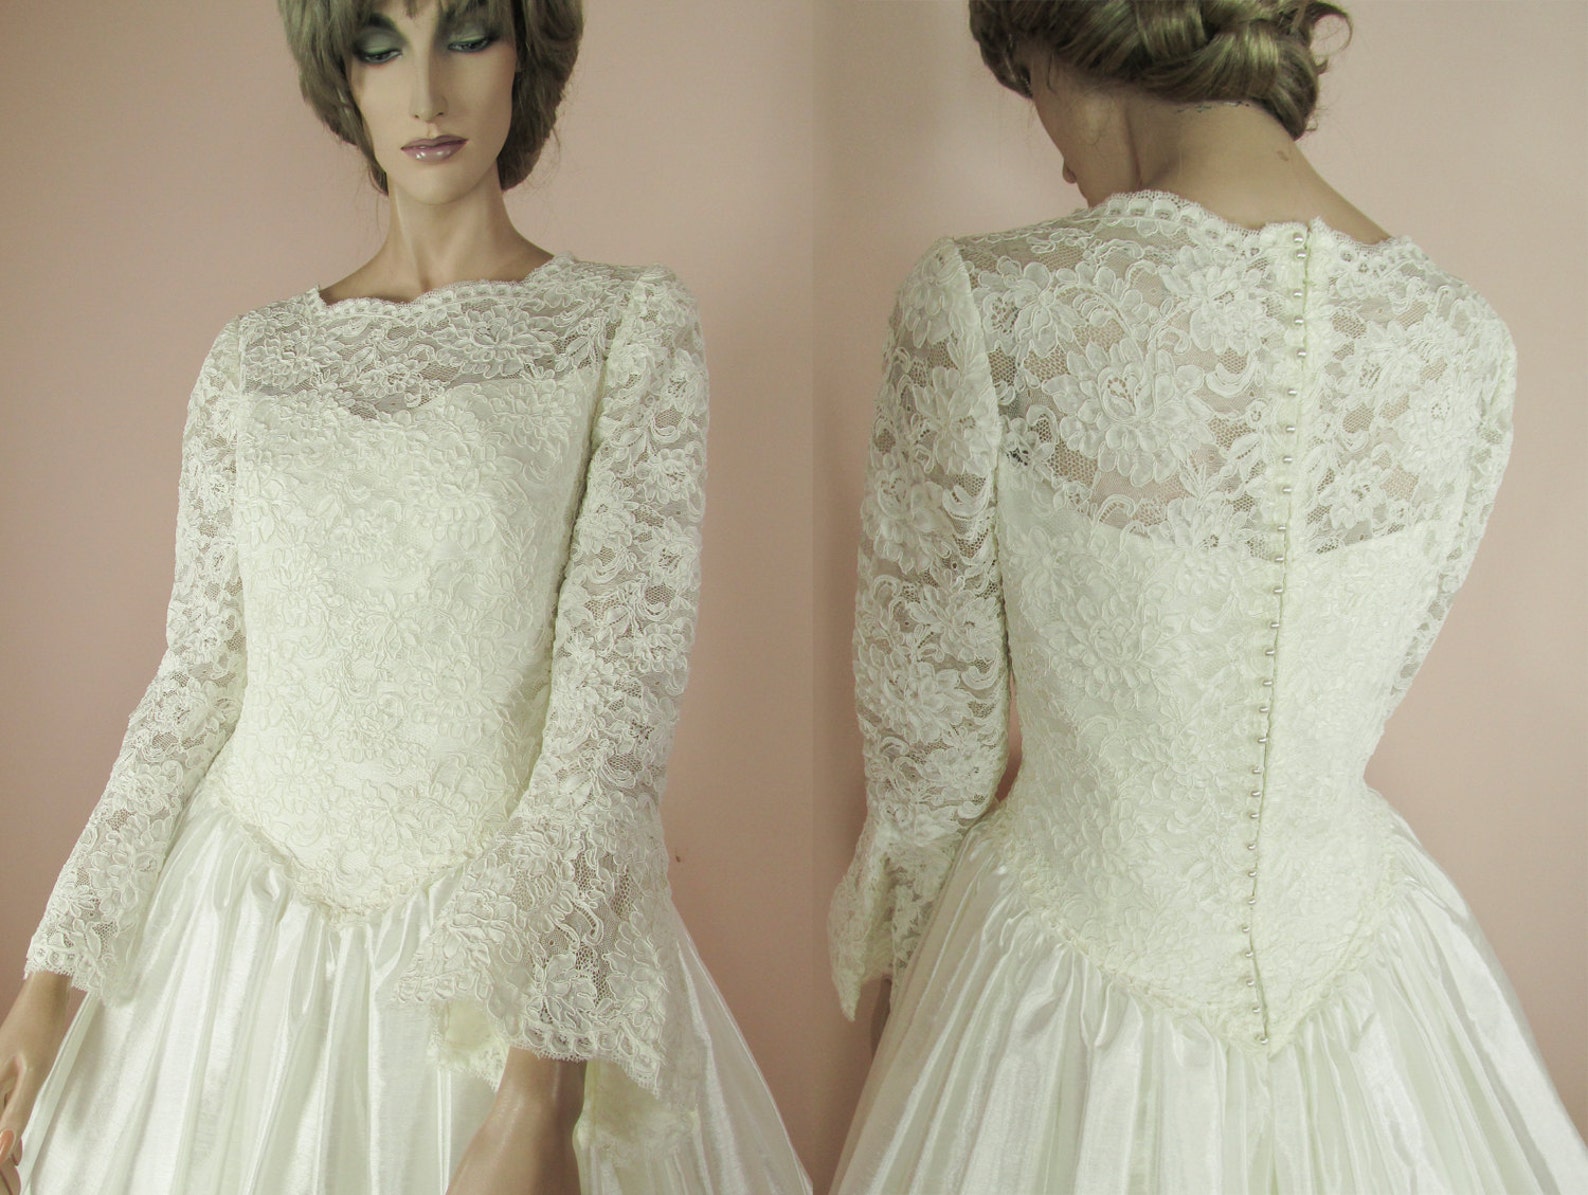 Vintage Wedding Dress 90's Bridal Gown From 1990s Lace Princess Wedding ...